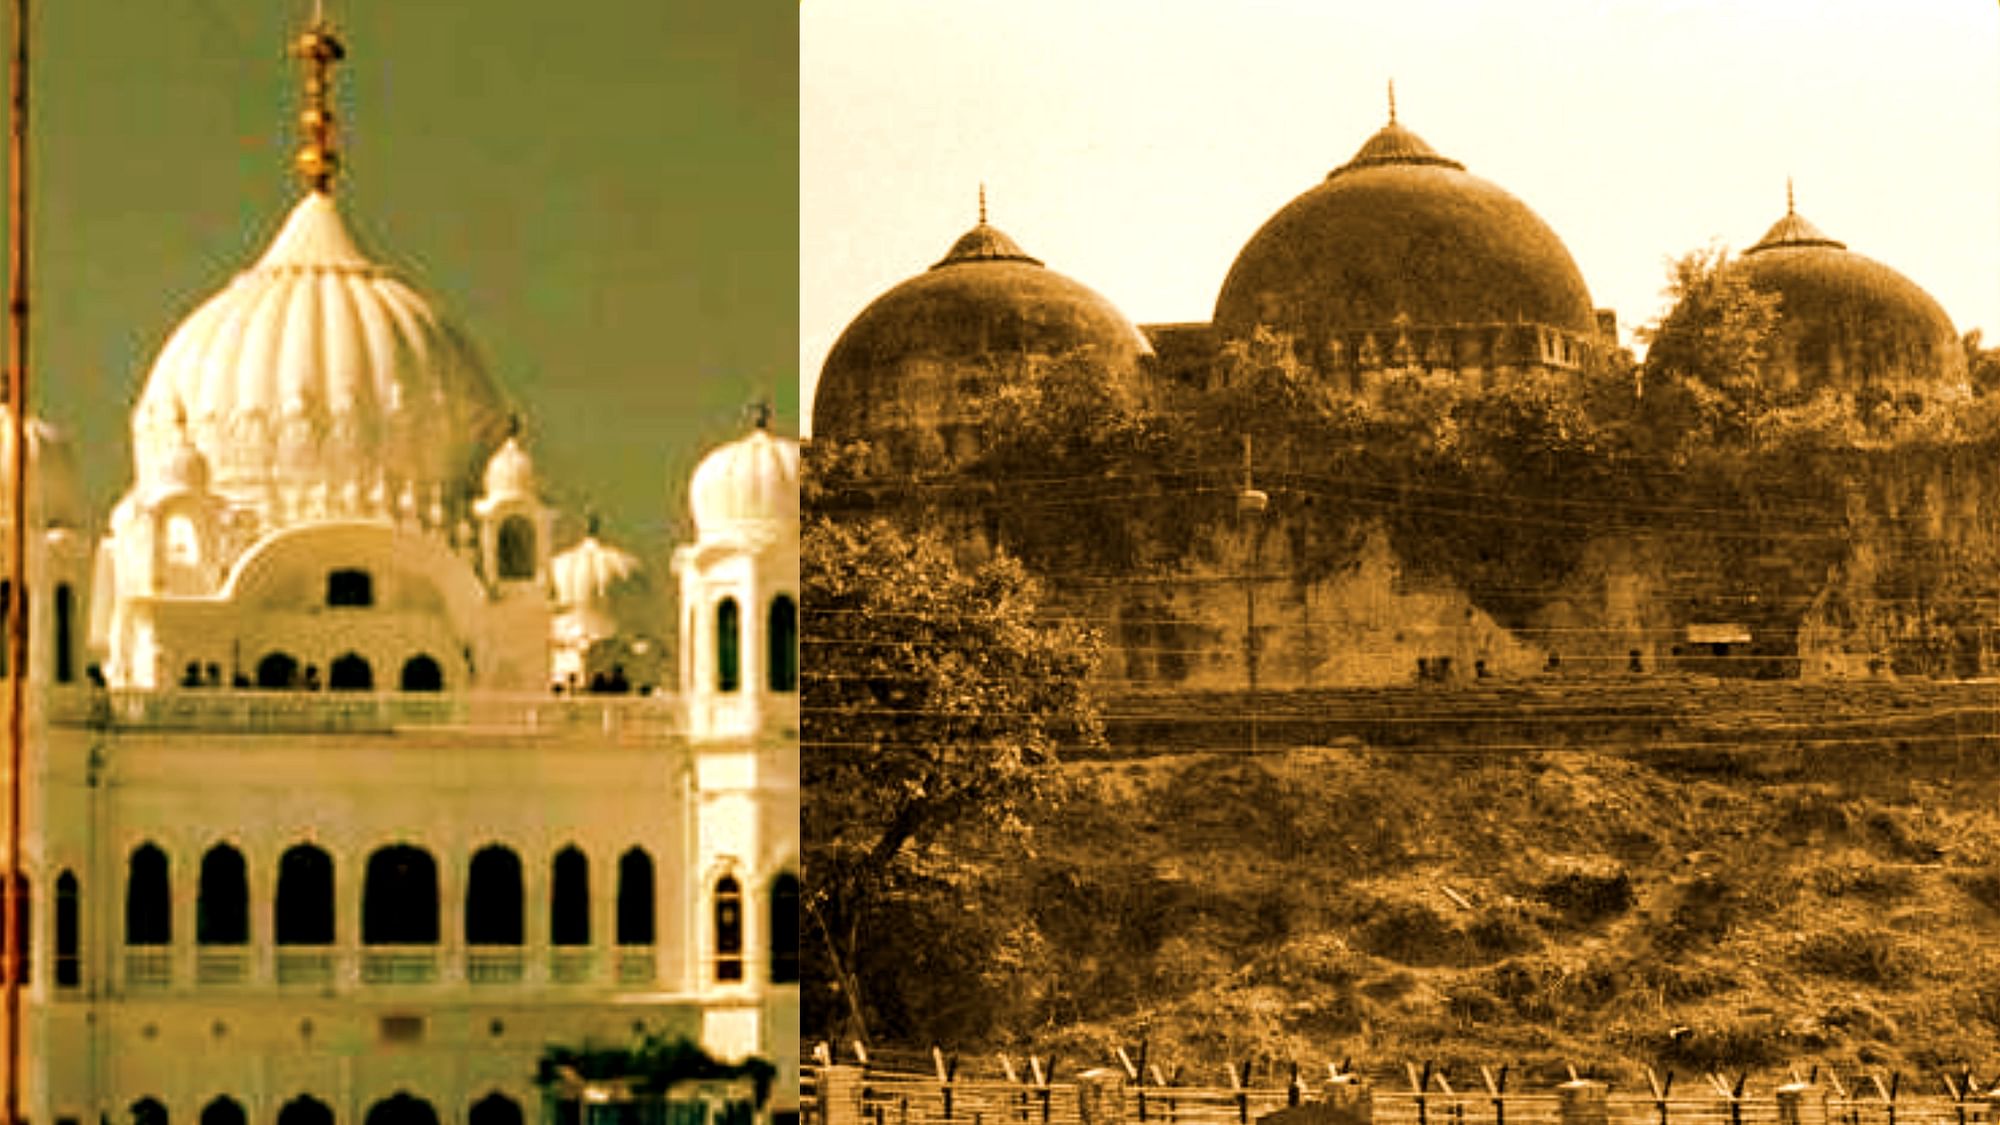 Ayodhya verdict and Kartarpur Corridor opening: We can either move in the direction of reconciliation – both Hindu-Muslim reconciliation and India-Pakistan normalisation – or we can slide back into the morass of perpetual conflict . 